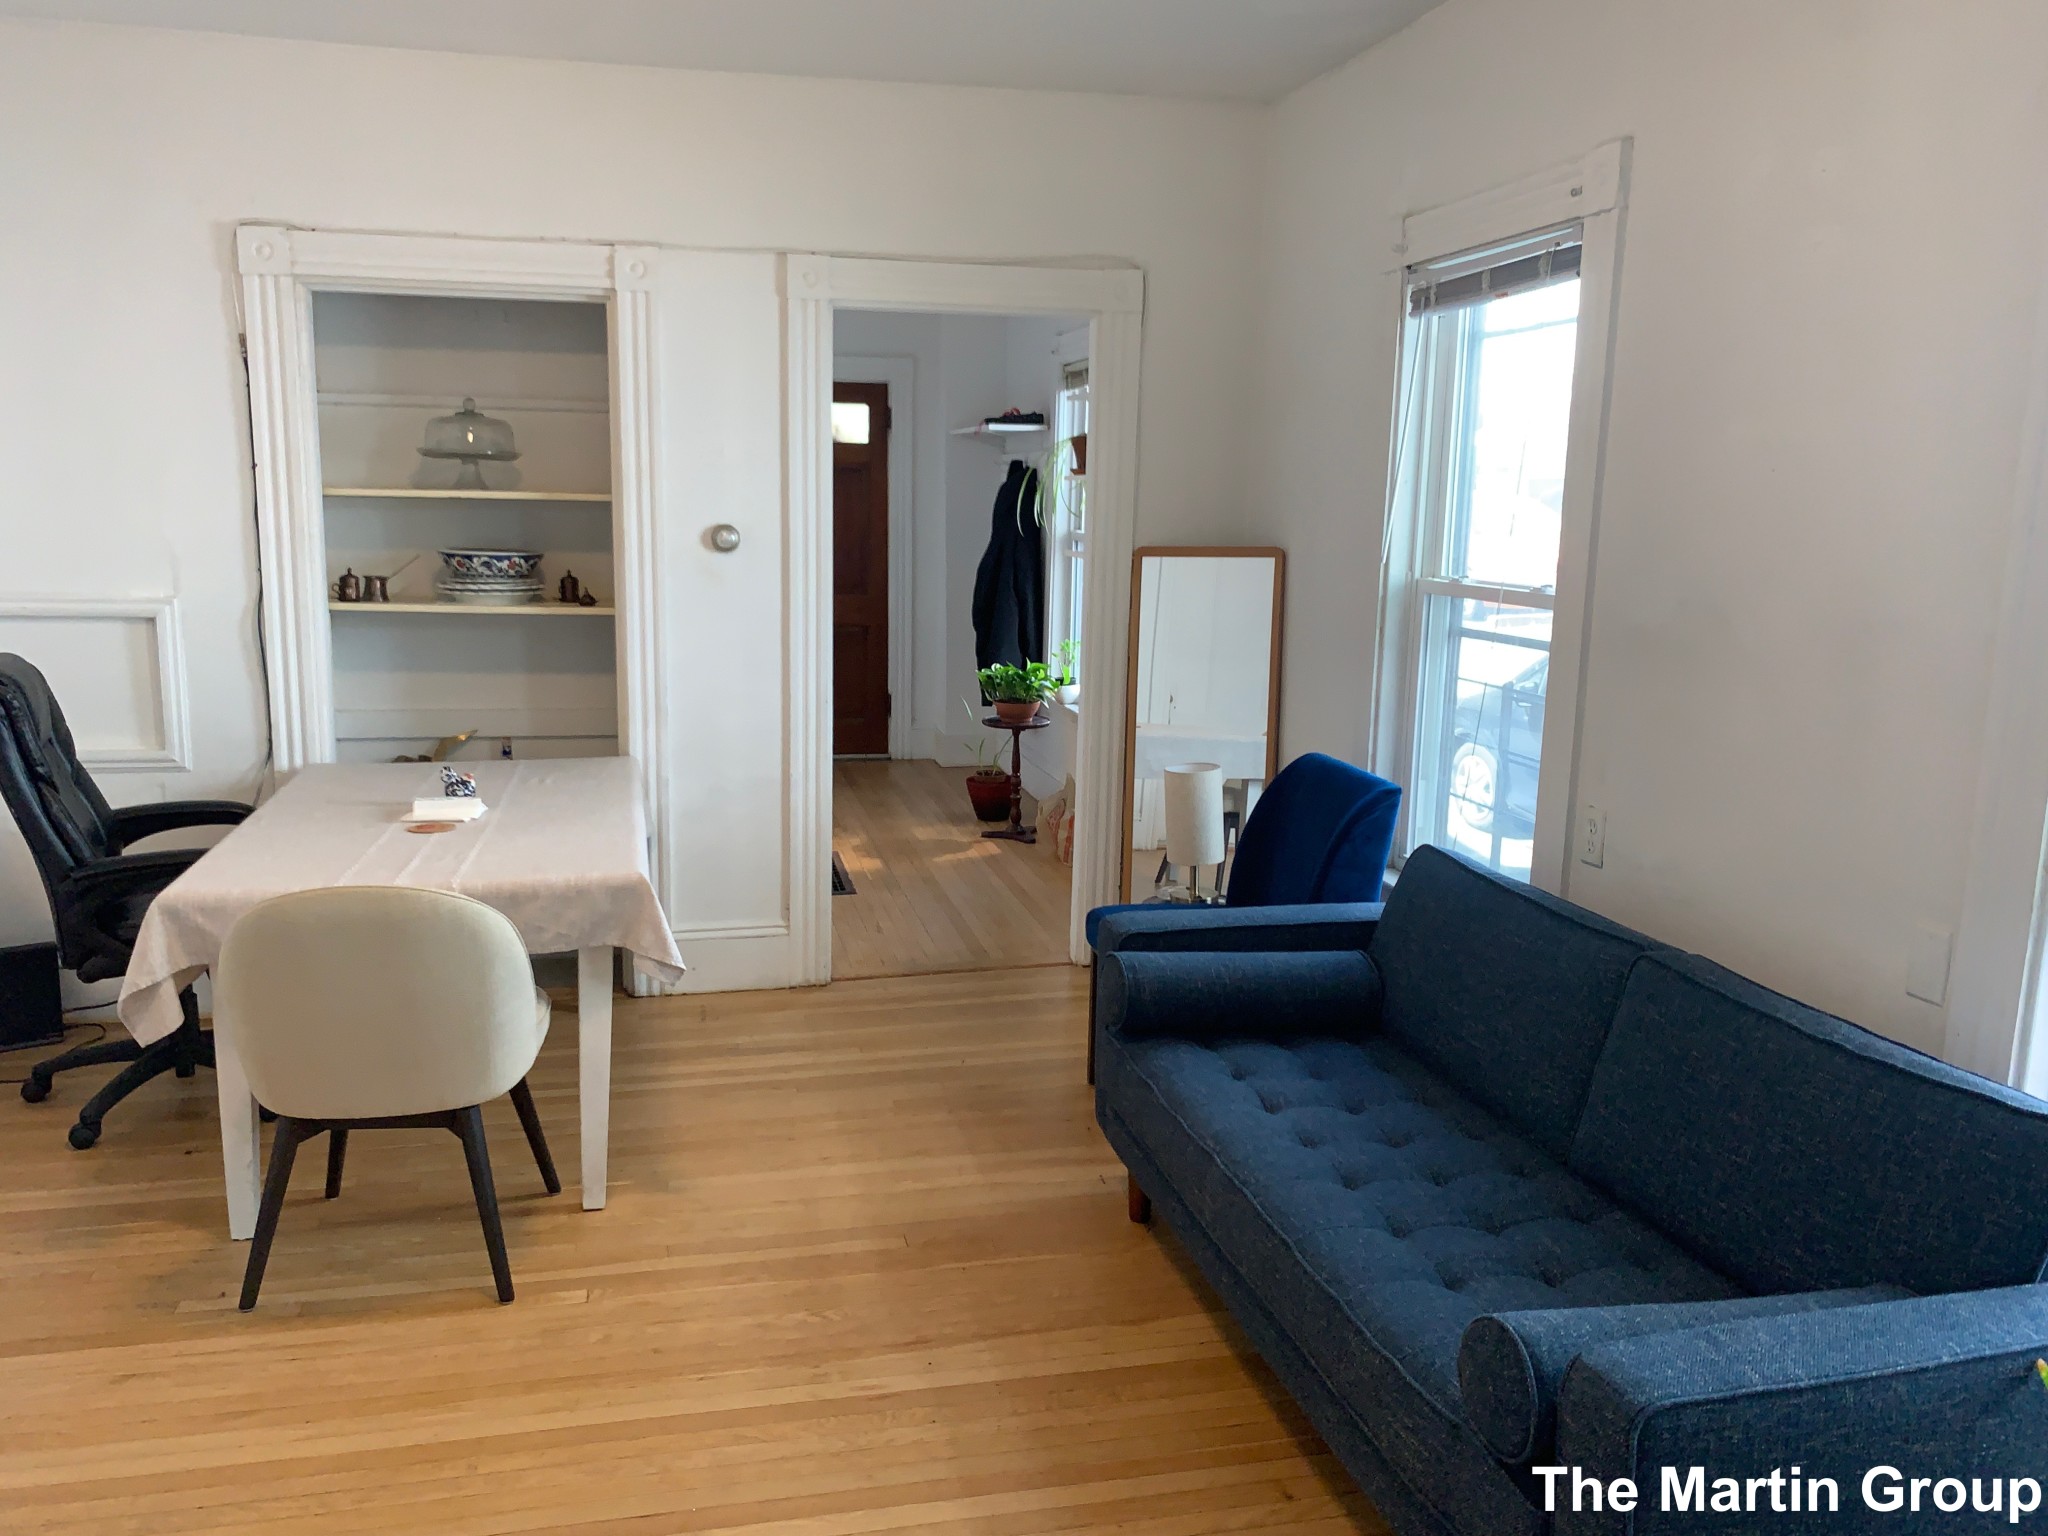 Photos of apartment on Hudson,Somerville MA 02143